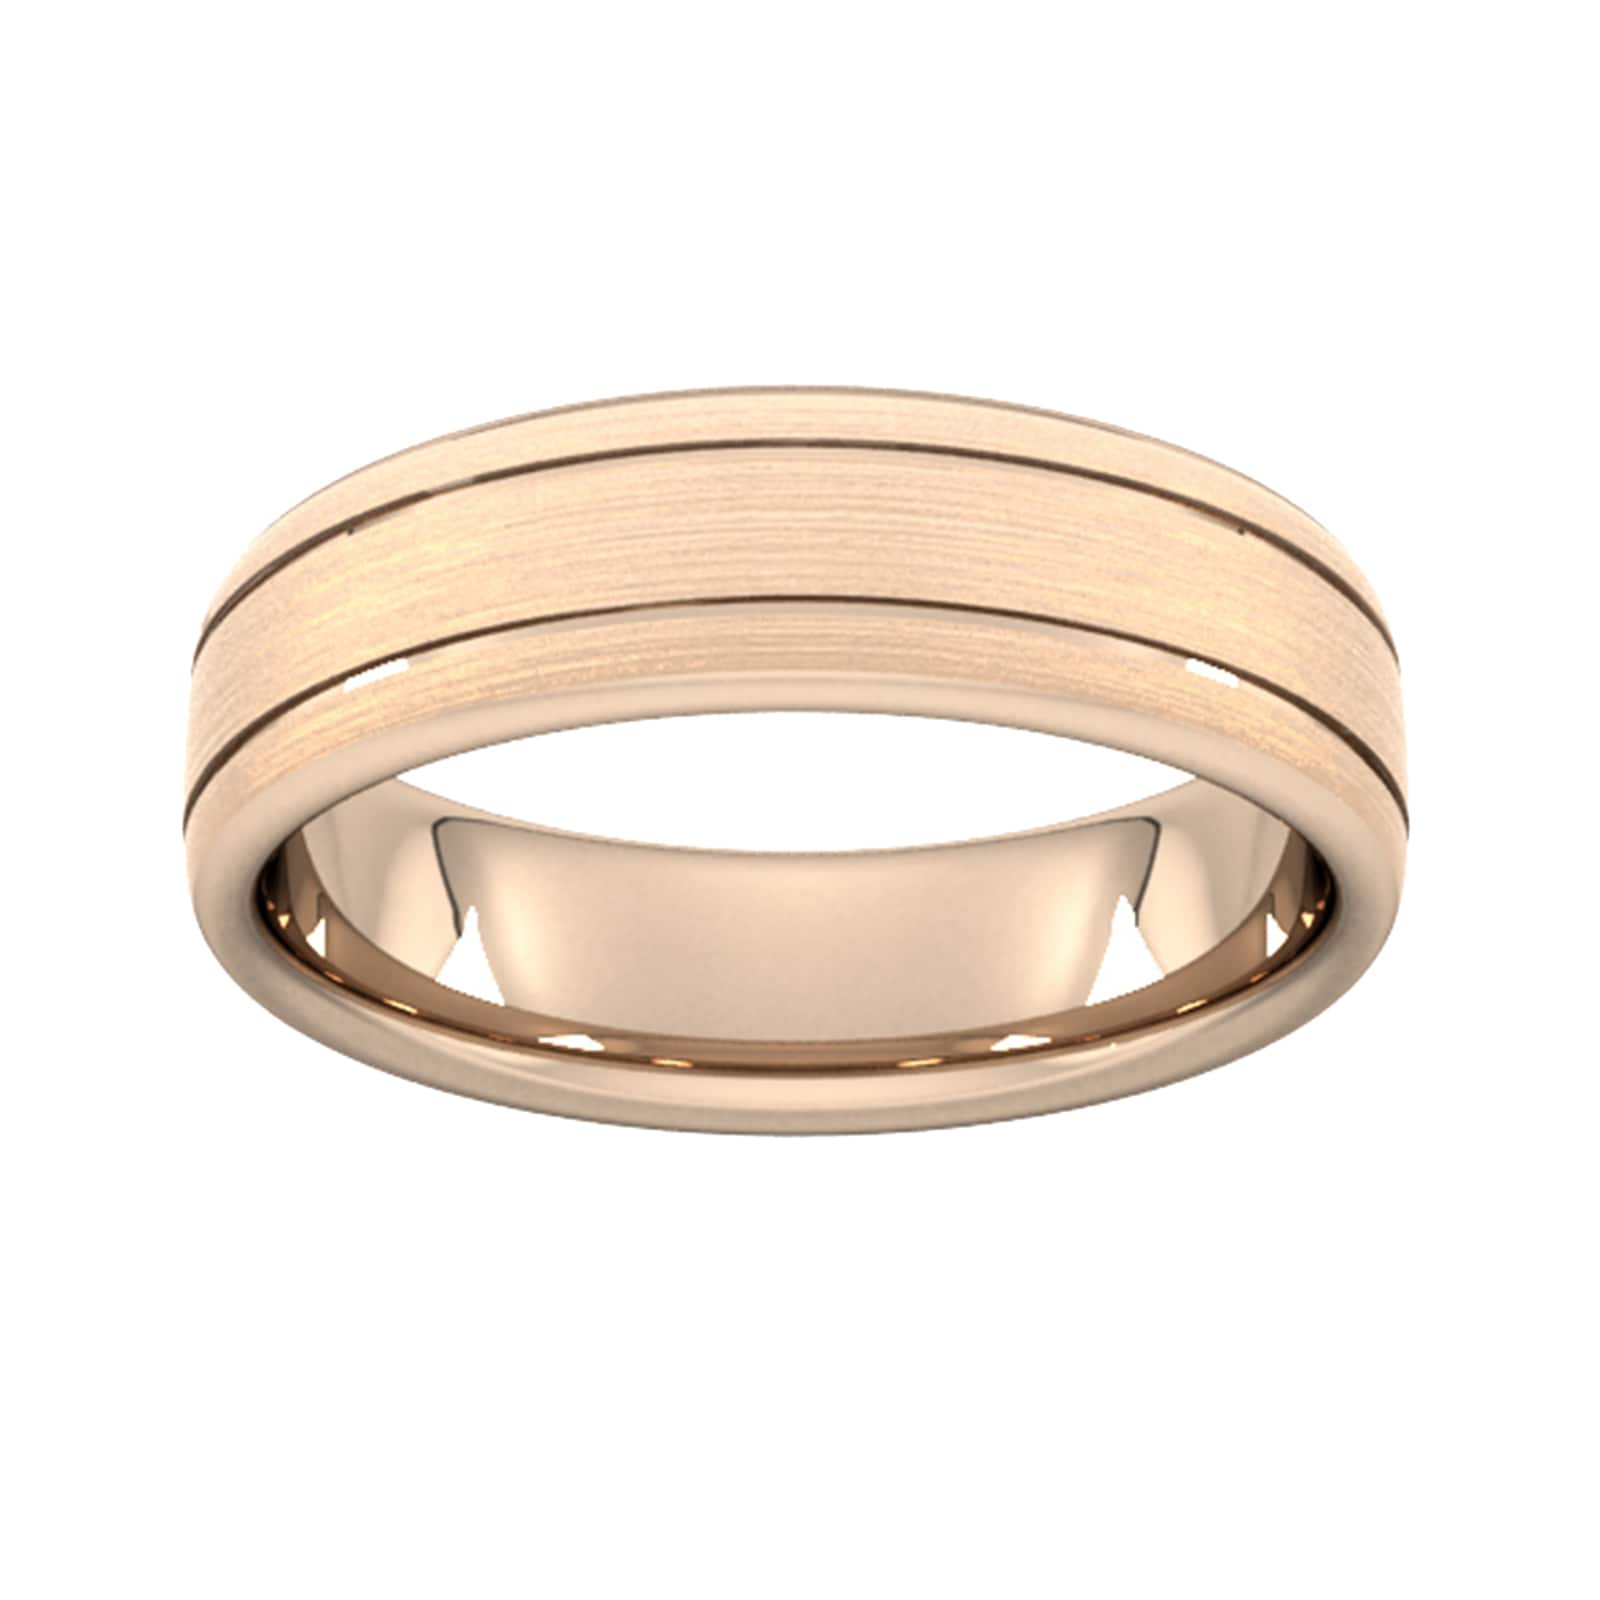 6mm Slight Court Standard Matt Finish With Double Grooves Wedding Ring In 18 Carat Rose Gold - Ring Size S